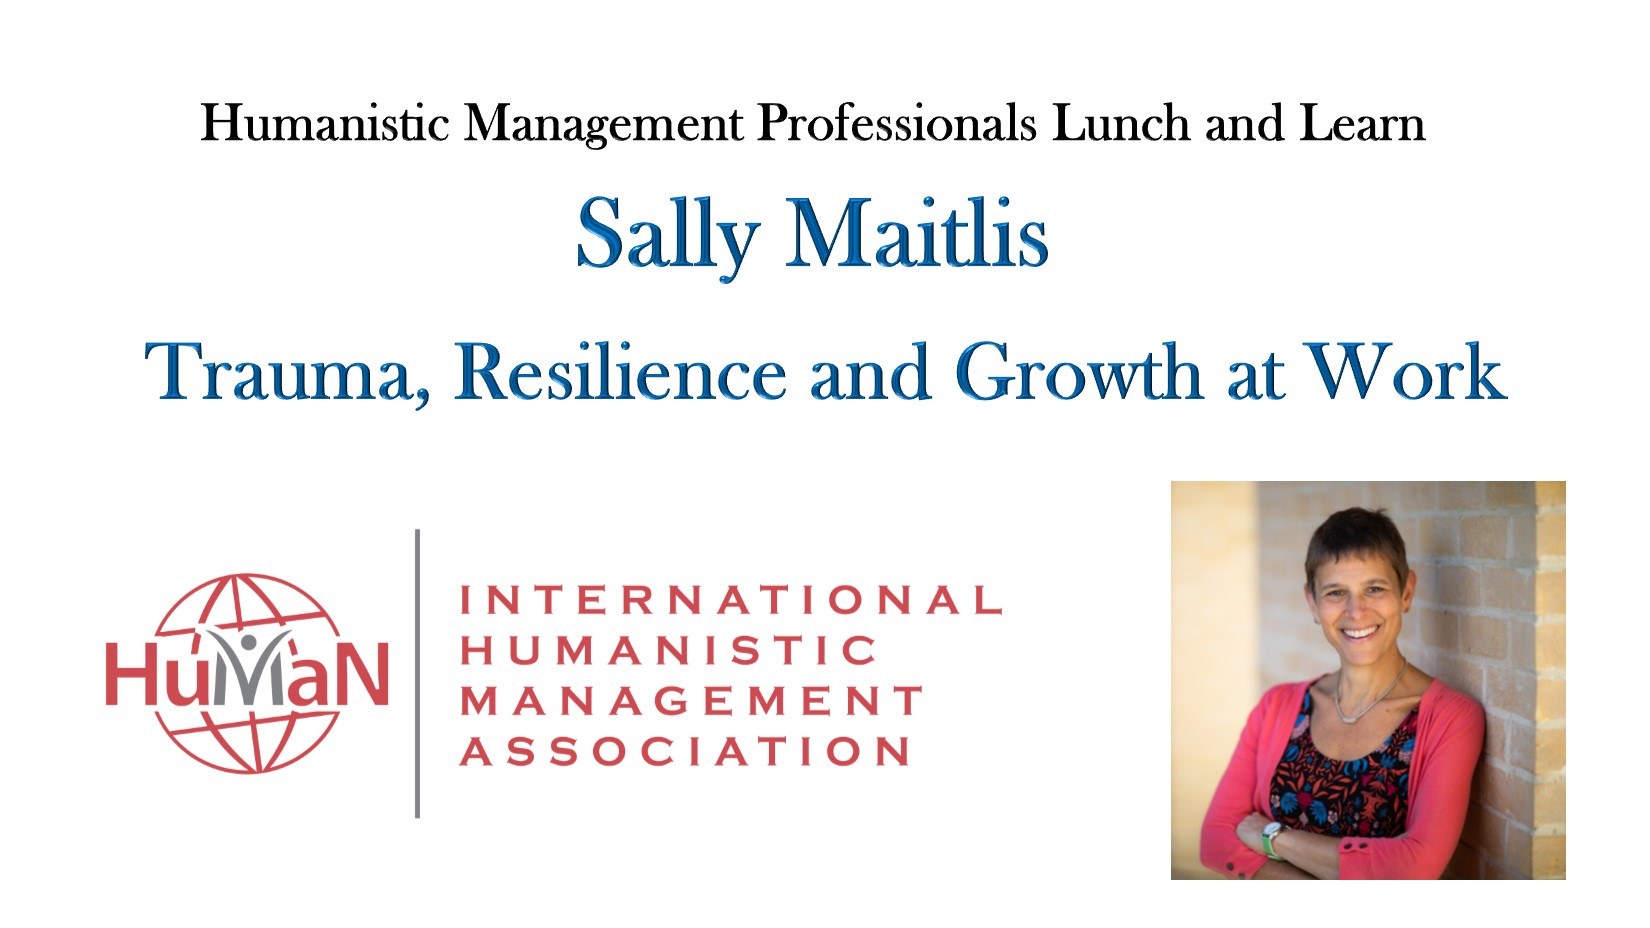 Trauma Resilience & Growth at Work with Sally Maitlis – Humanistic Management Professionals Lunch and Learn